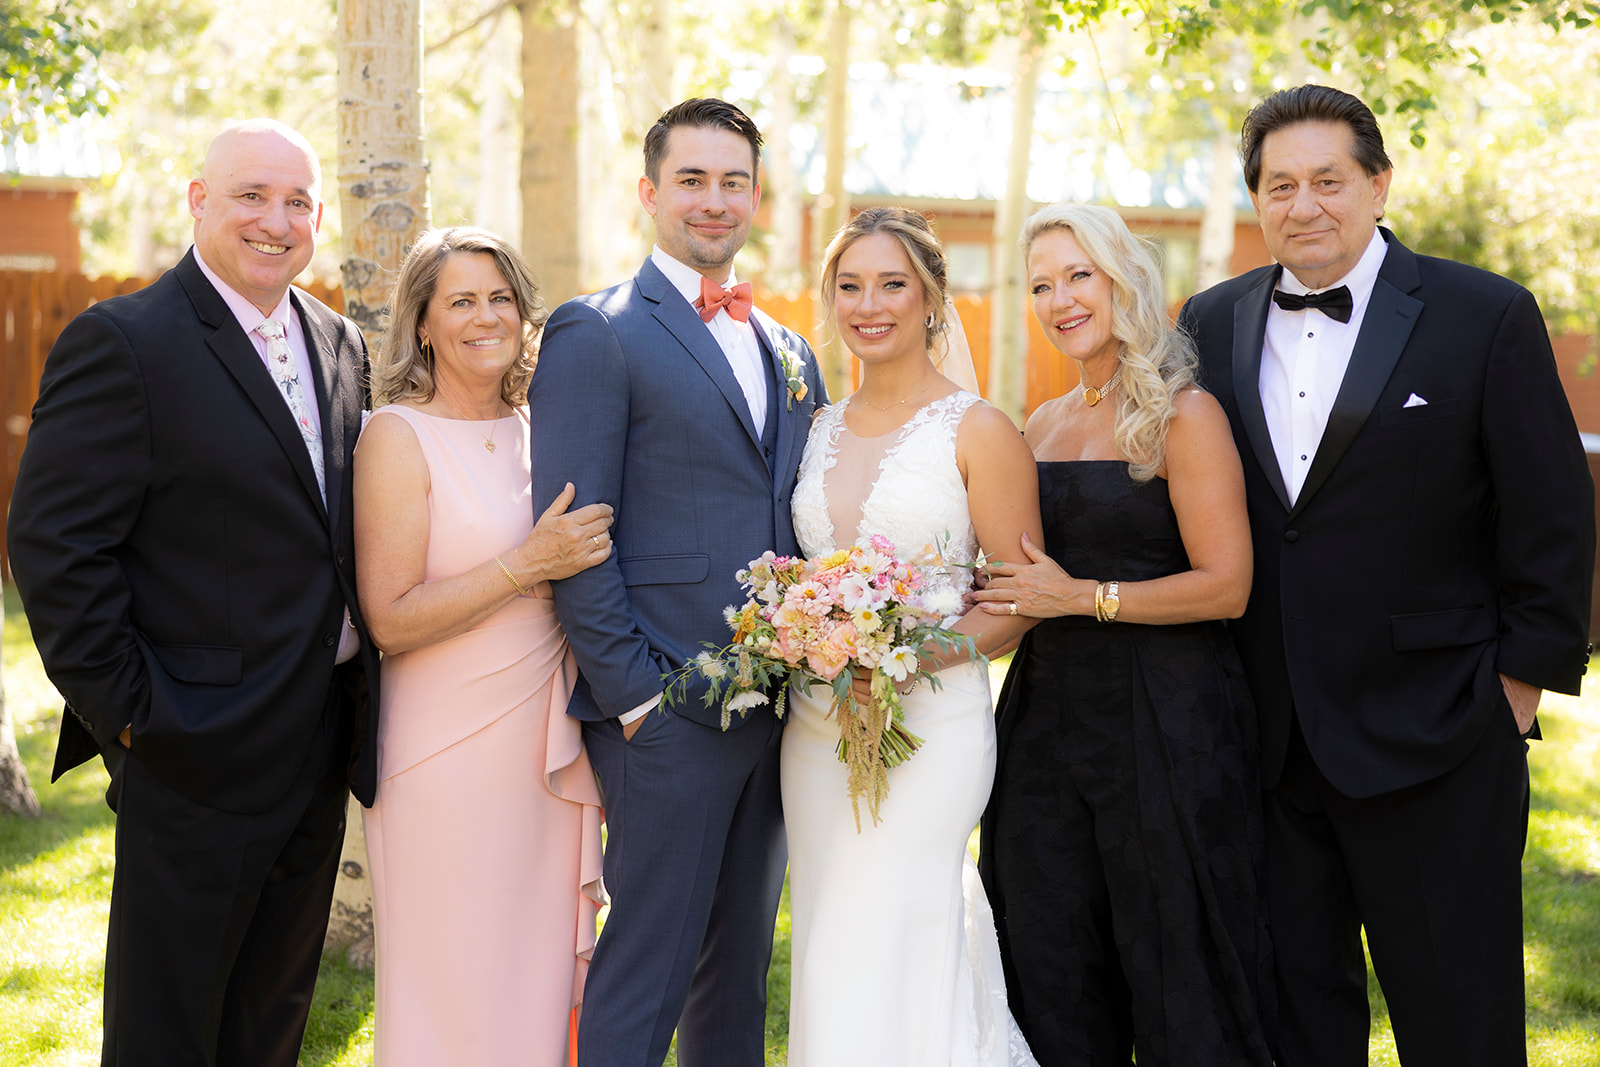 immediate family with bride and groom for family portraits